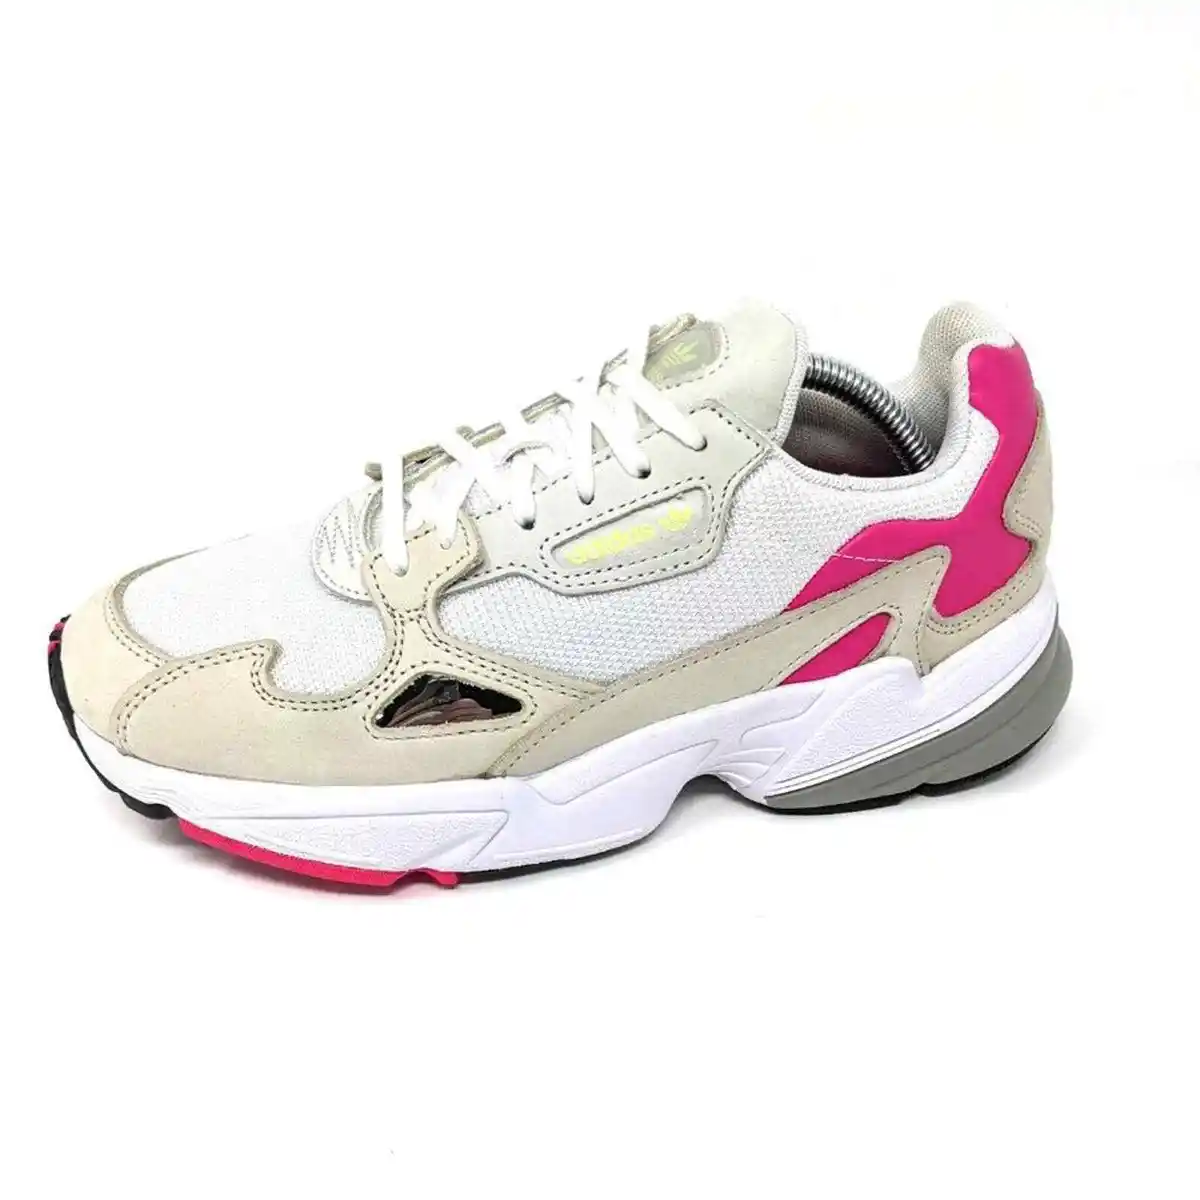 Adidas Womens 7 Falcon White Pink Y2K 90s Kylie Jenner Sneakers